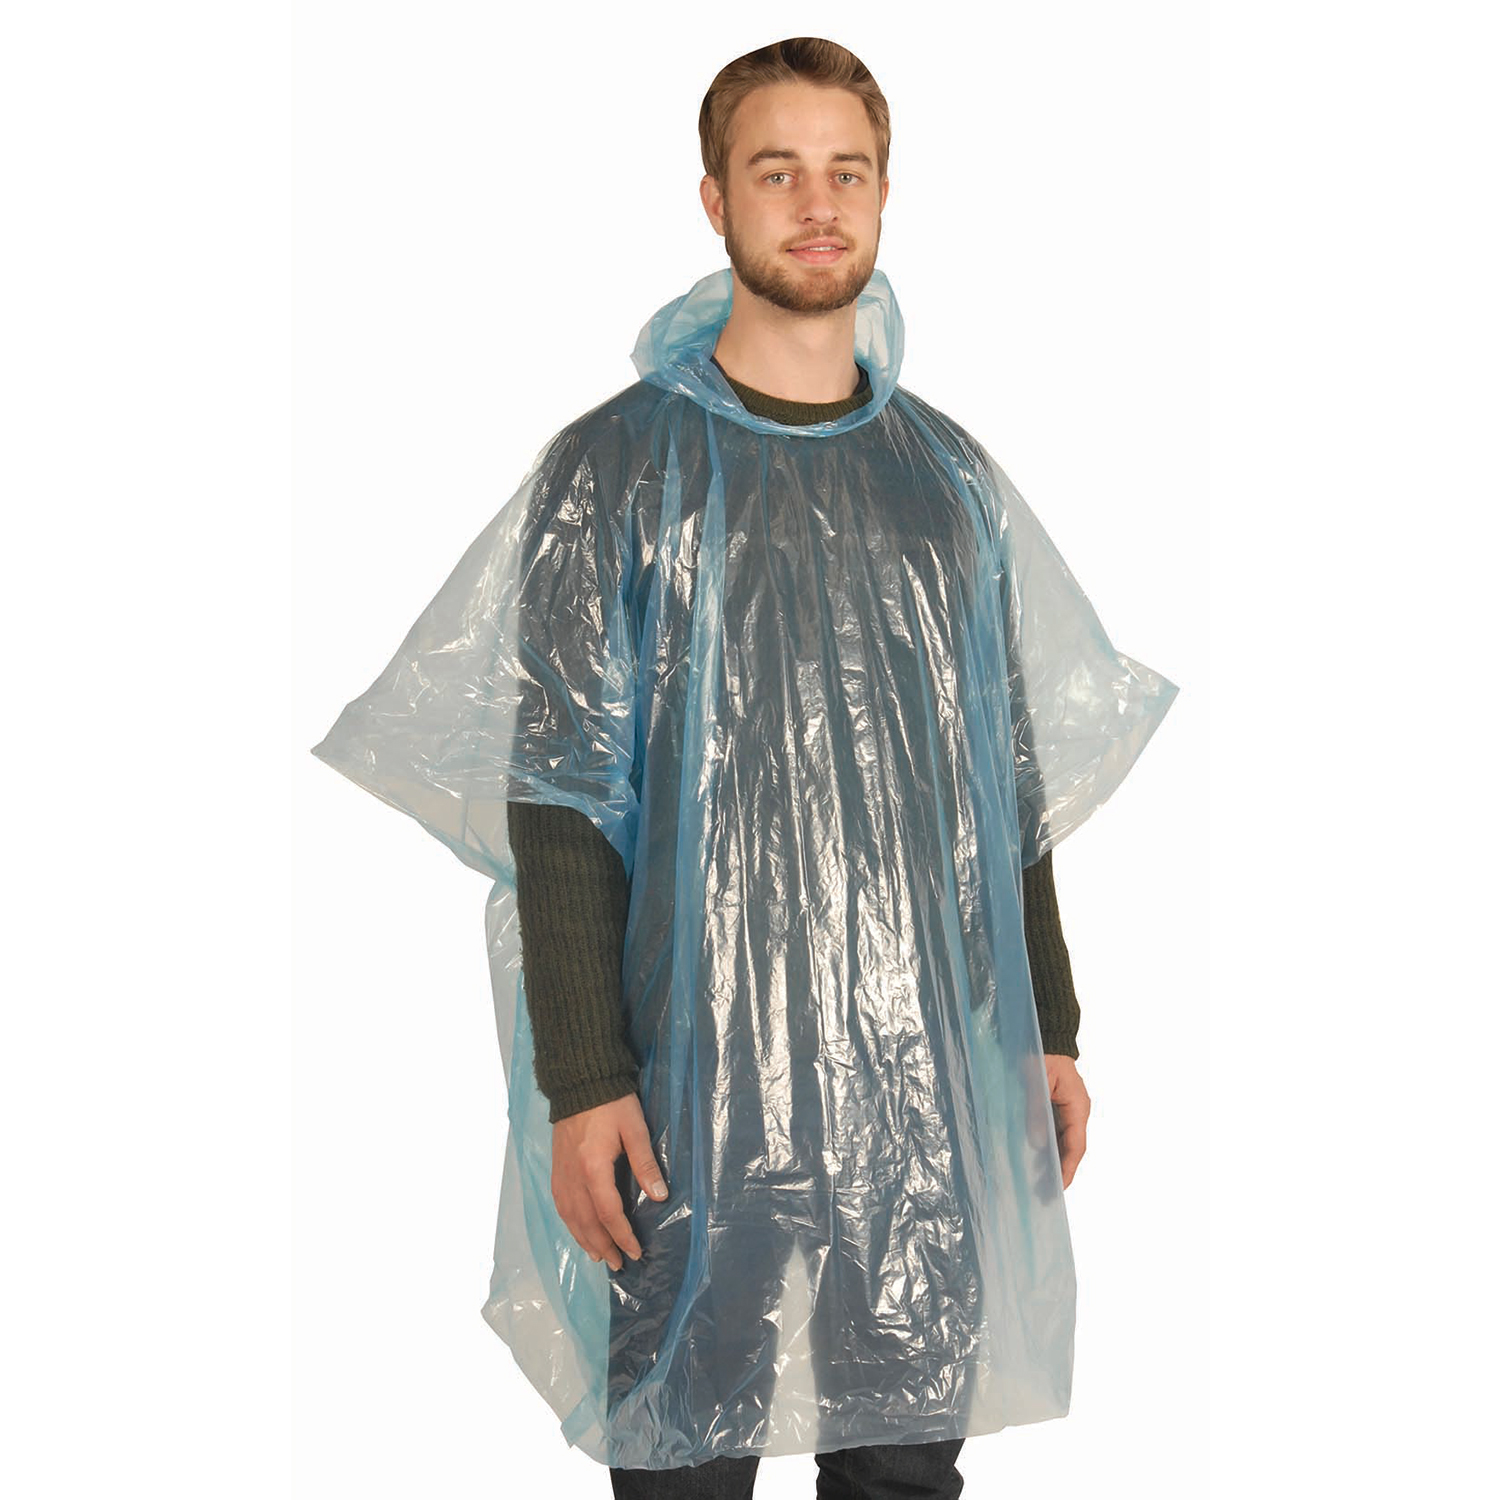 World Famous - Emergency poncho, assorted colors